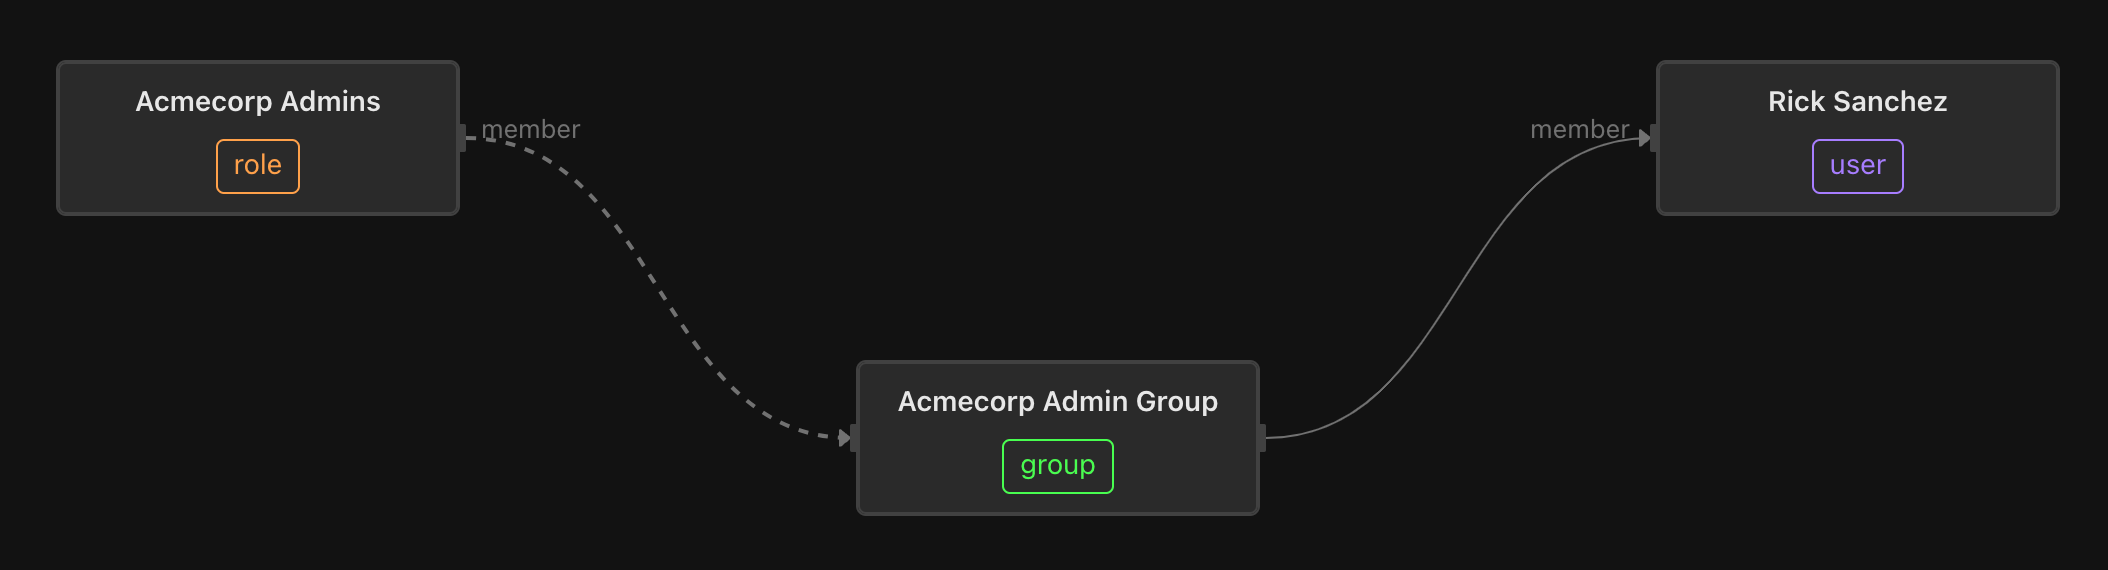 group-to-user assignment